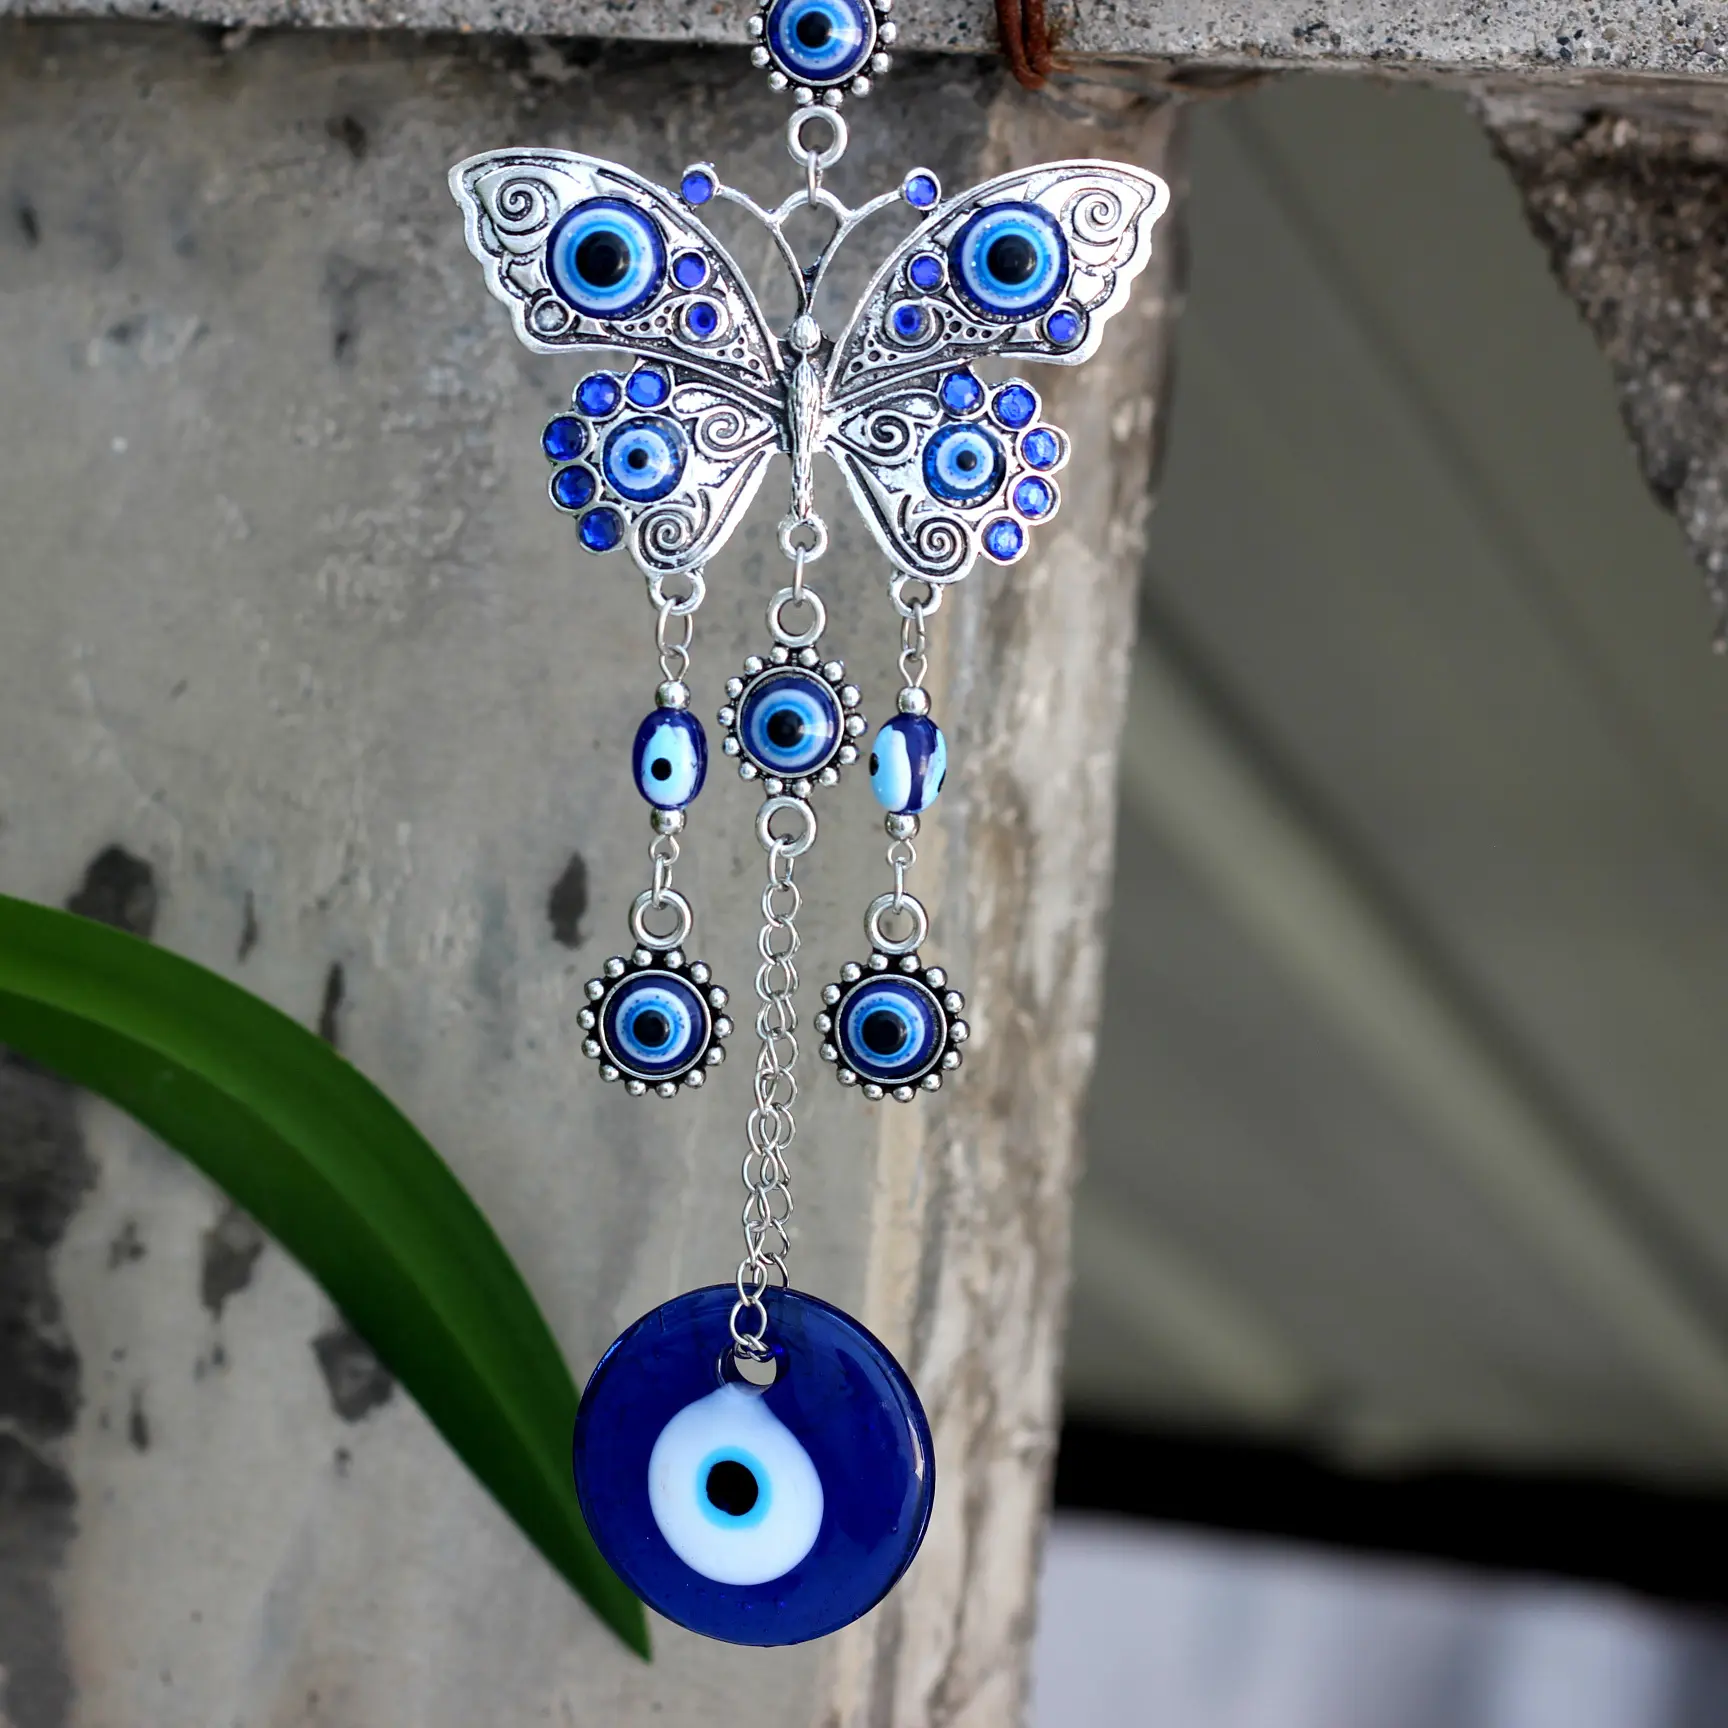 Nazar Turkish Blue Eye Butterfly Pendant Home Decor Accessories Erbulus Amulet Gift Home Decor Products Luxury Home Decor